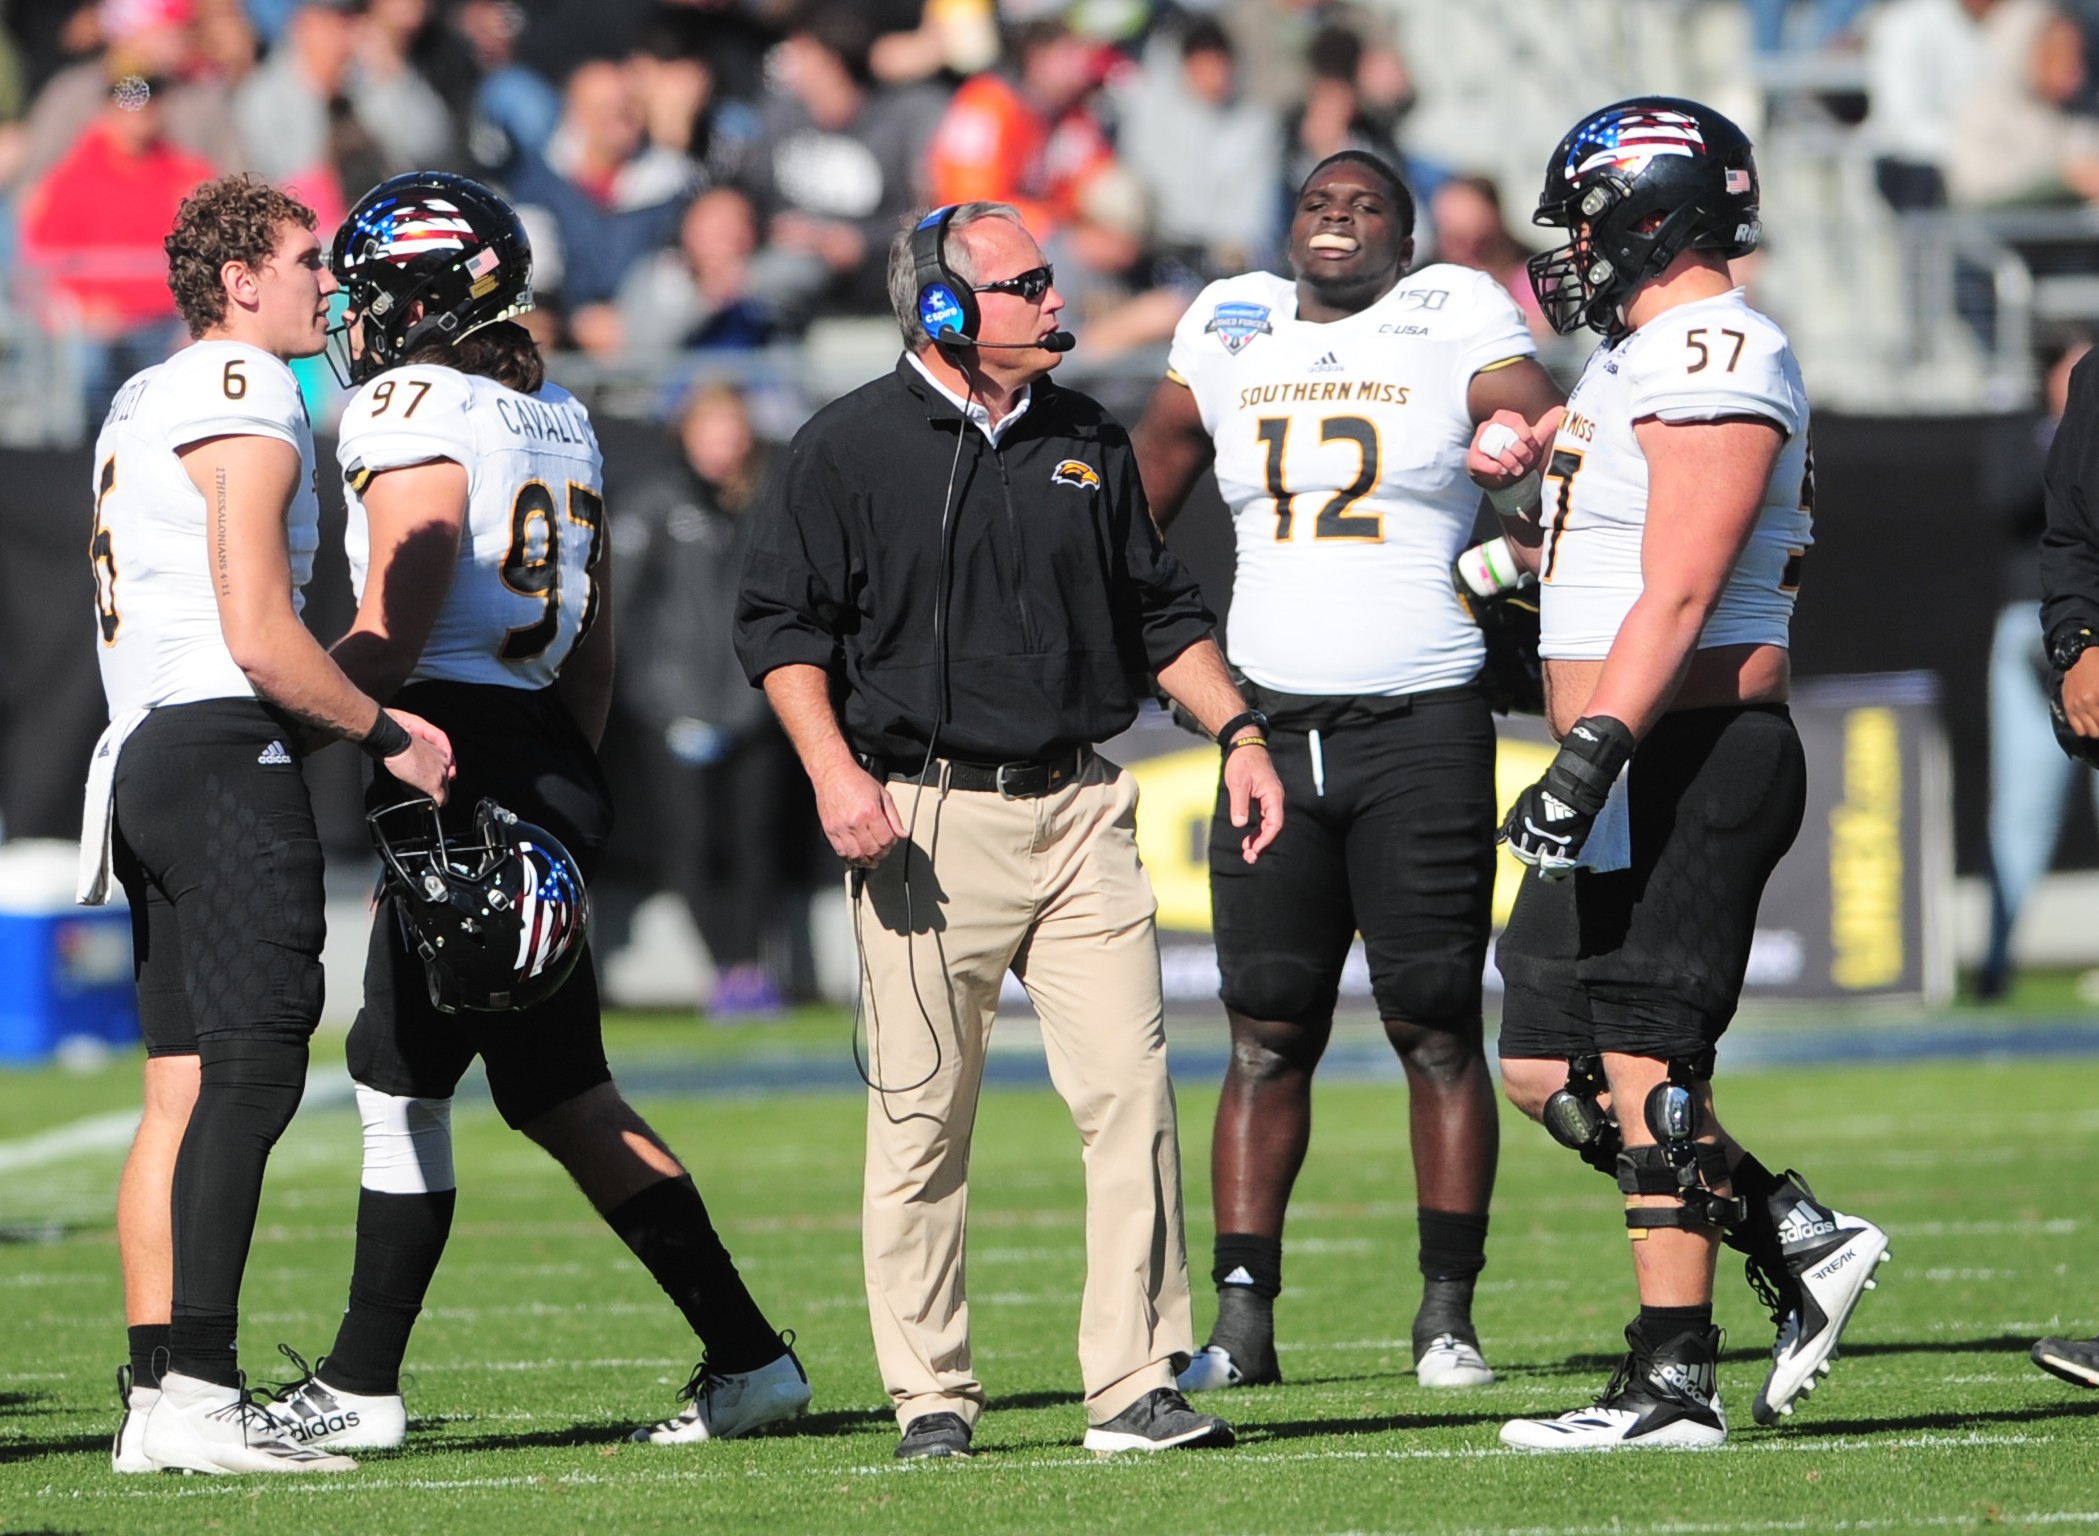 COLLEGE FOOTBALL: JAN 04 Armed Forces Bowl - Southern Miss v Tulane